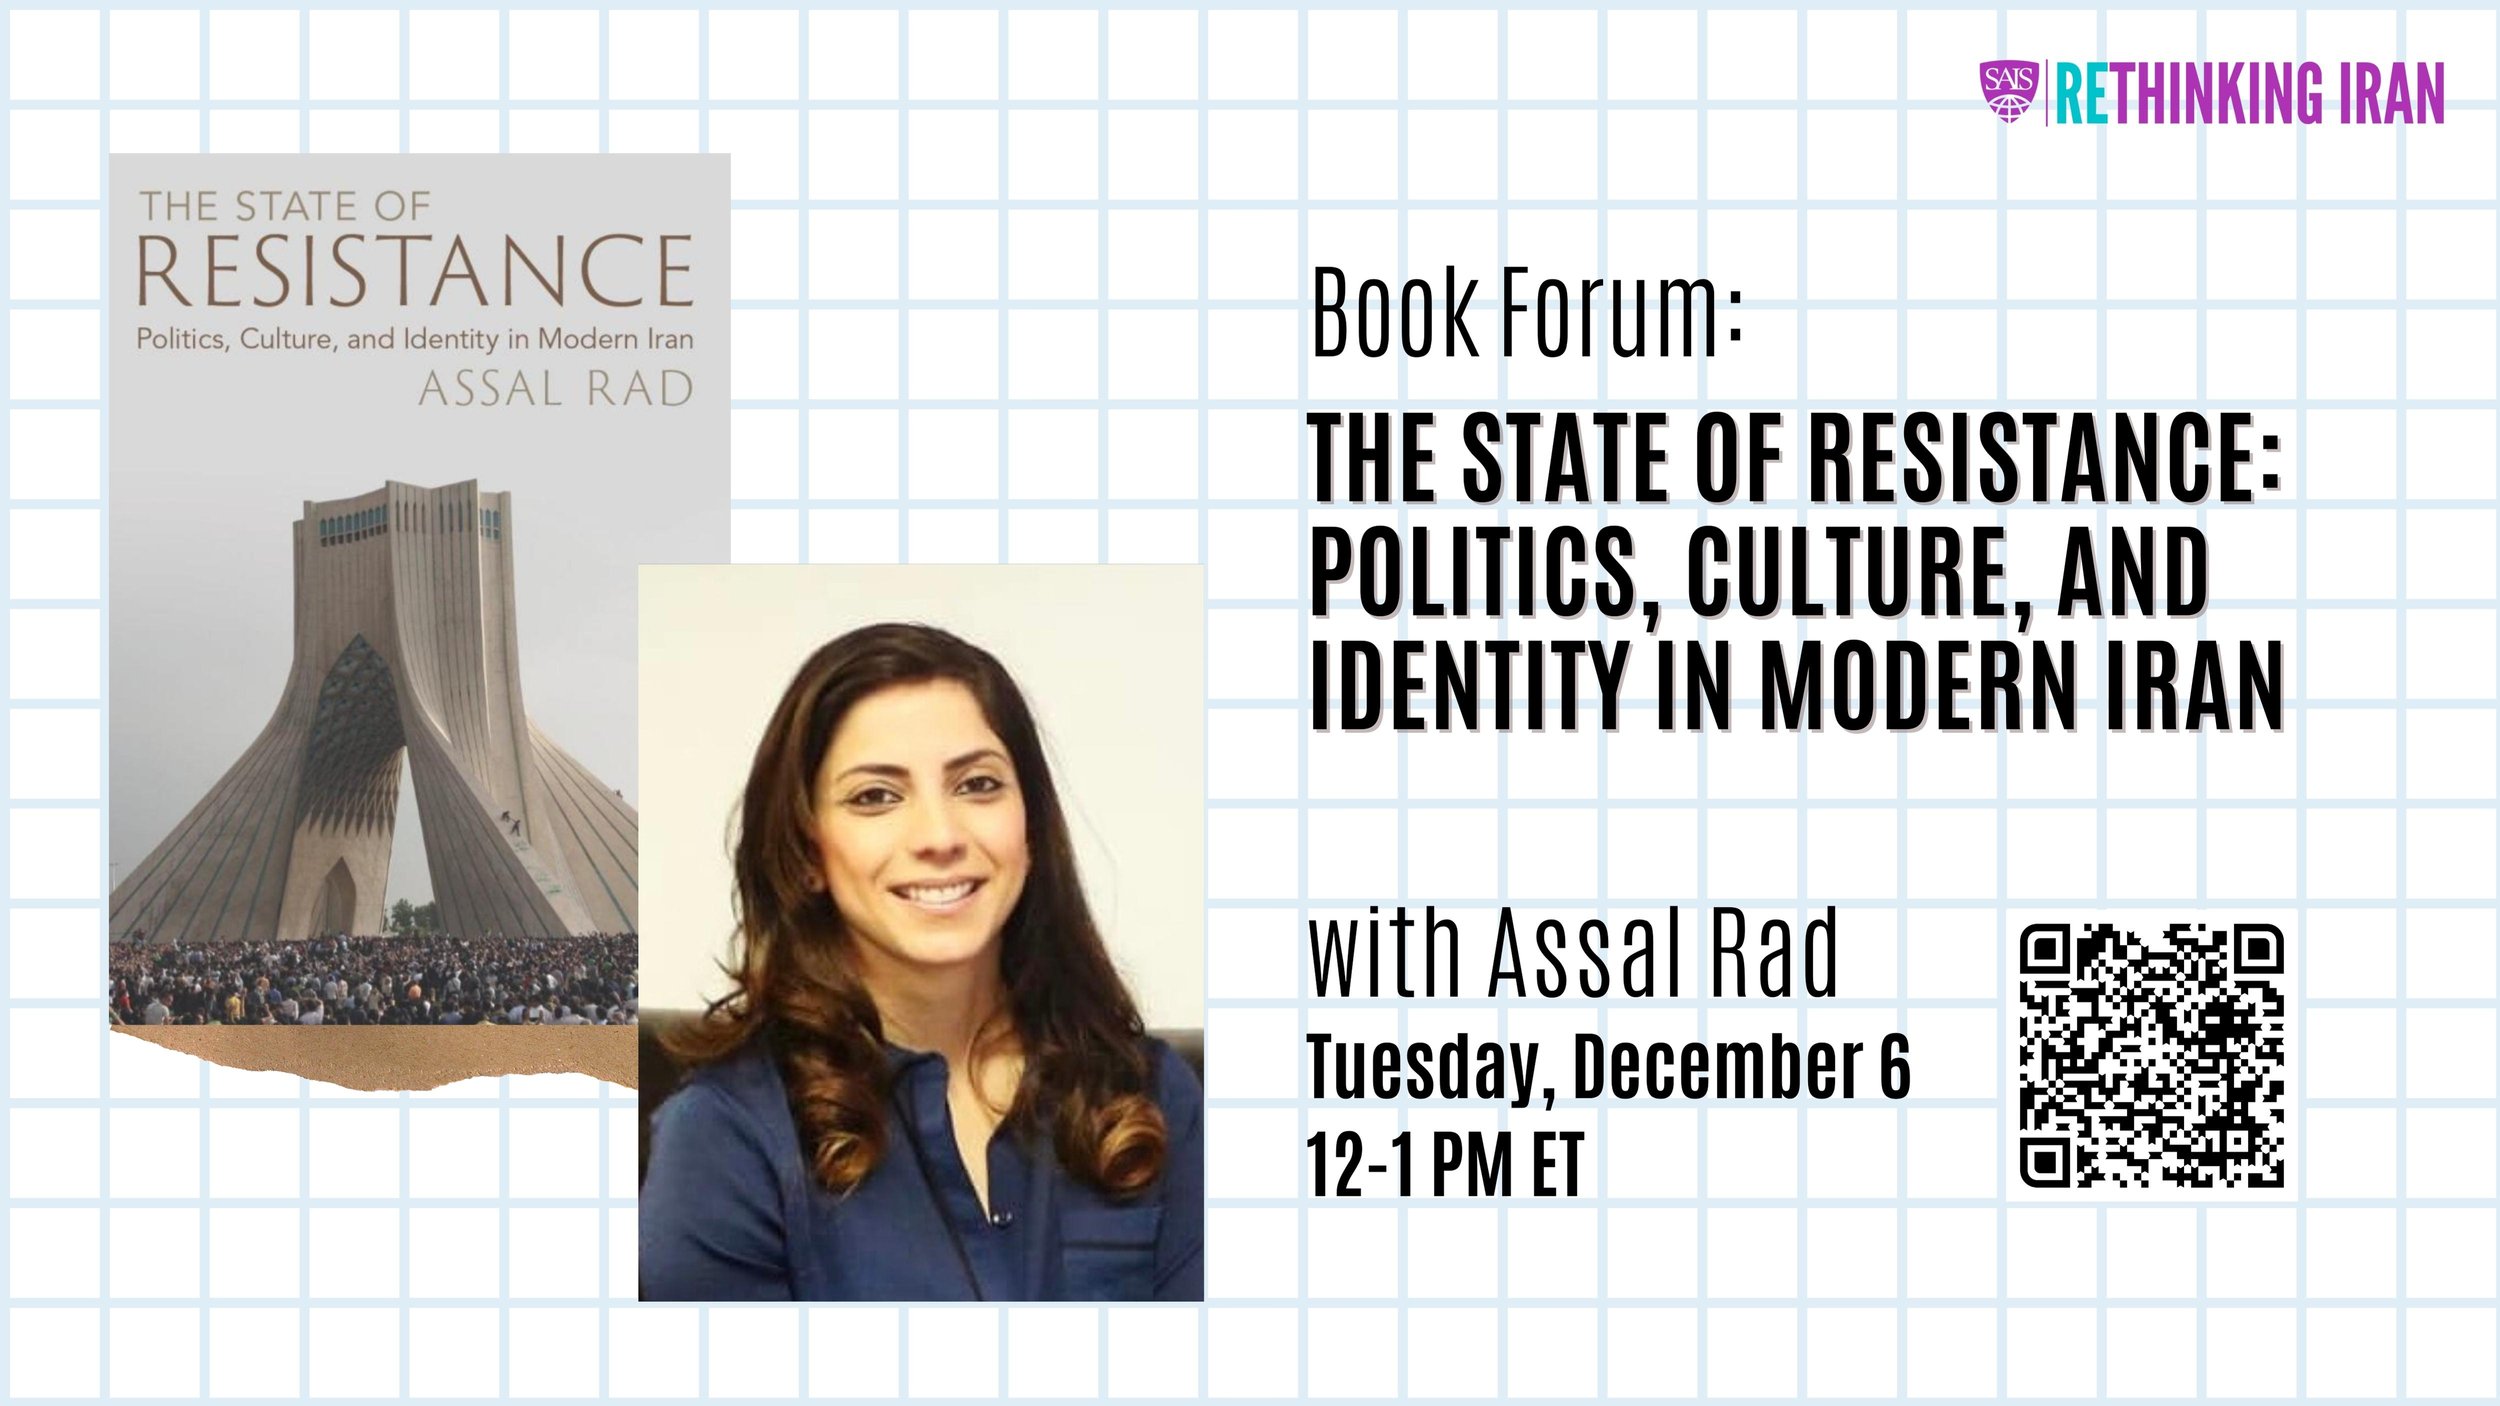 Book Forum - The State of Resistance: Politics, Culture, and Identity in Modern Iran